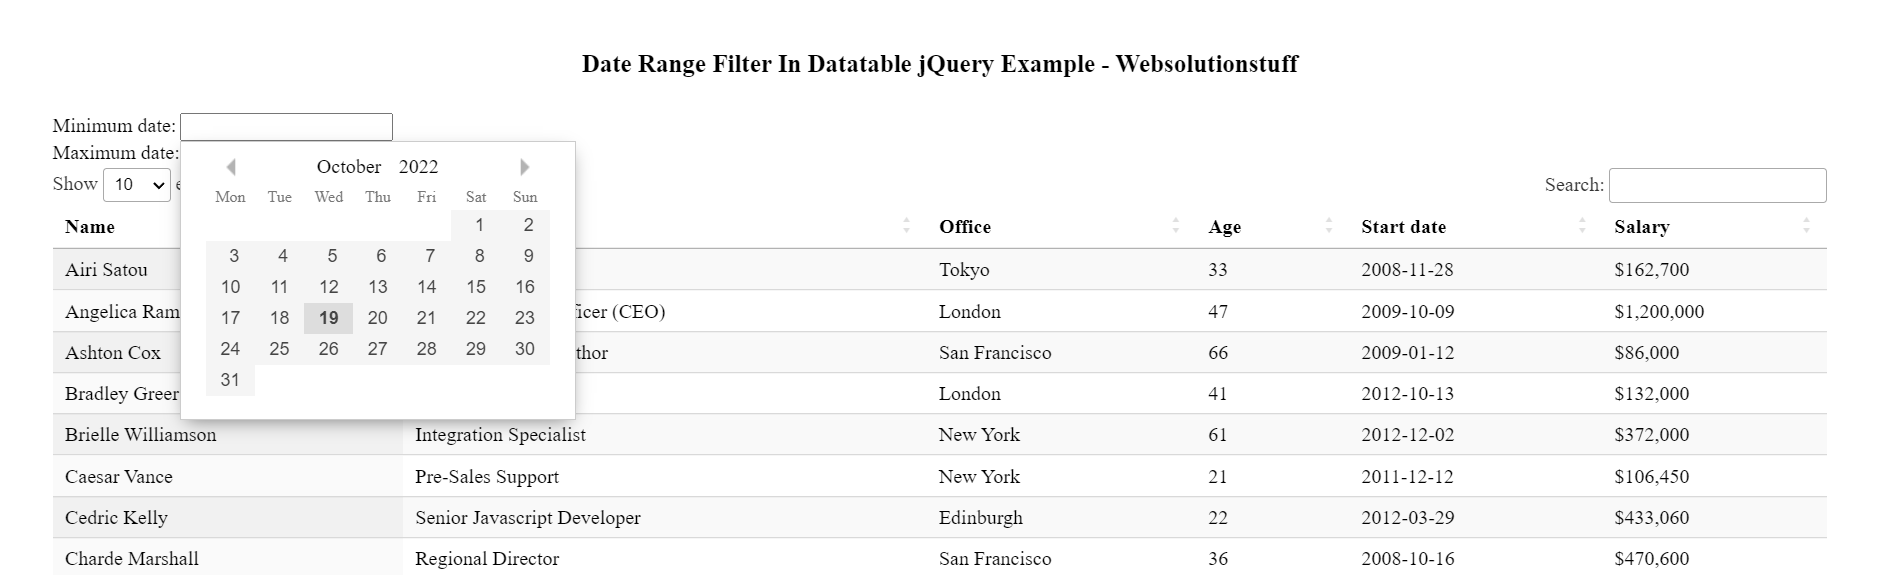 date_range_filter_in_datatable_jquery_example_output